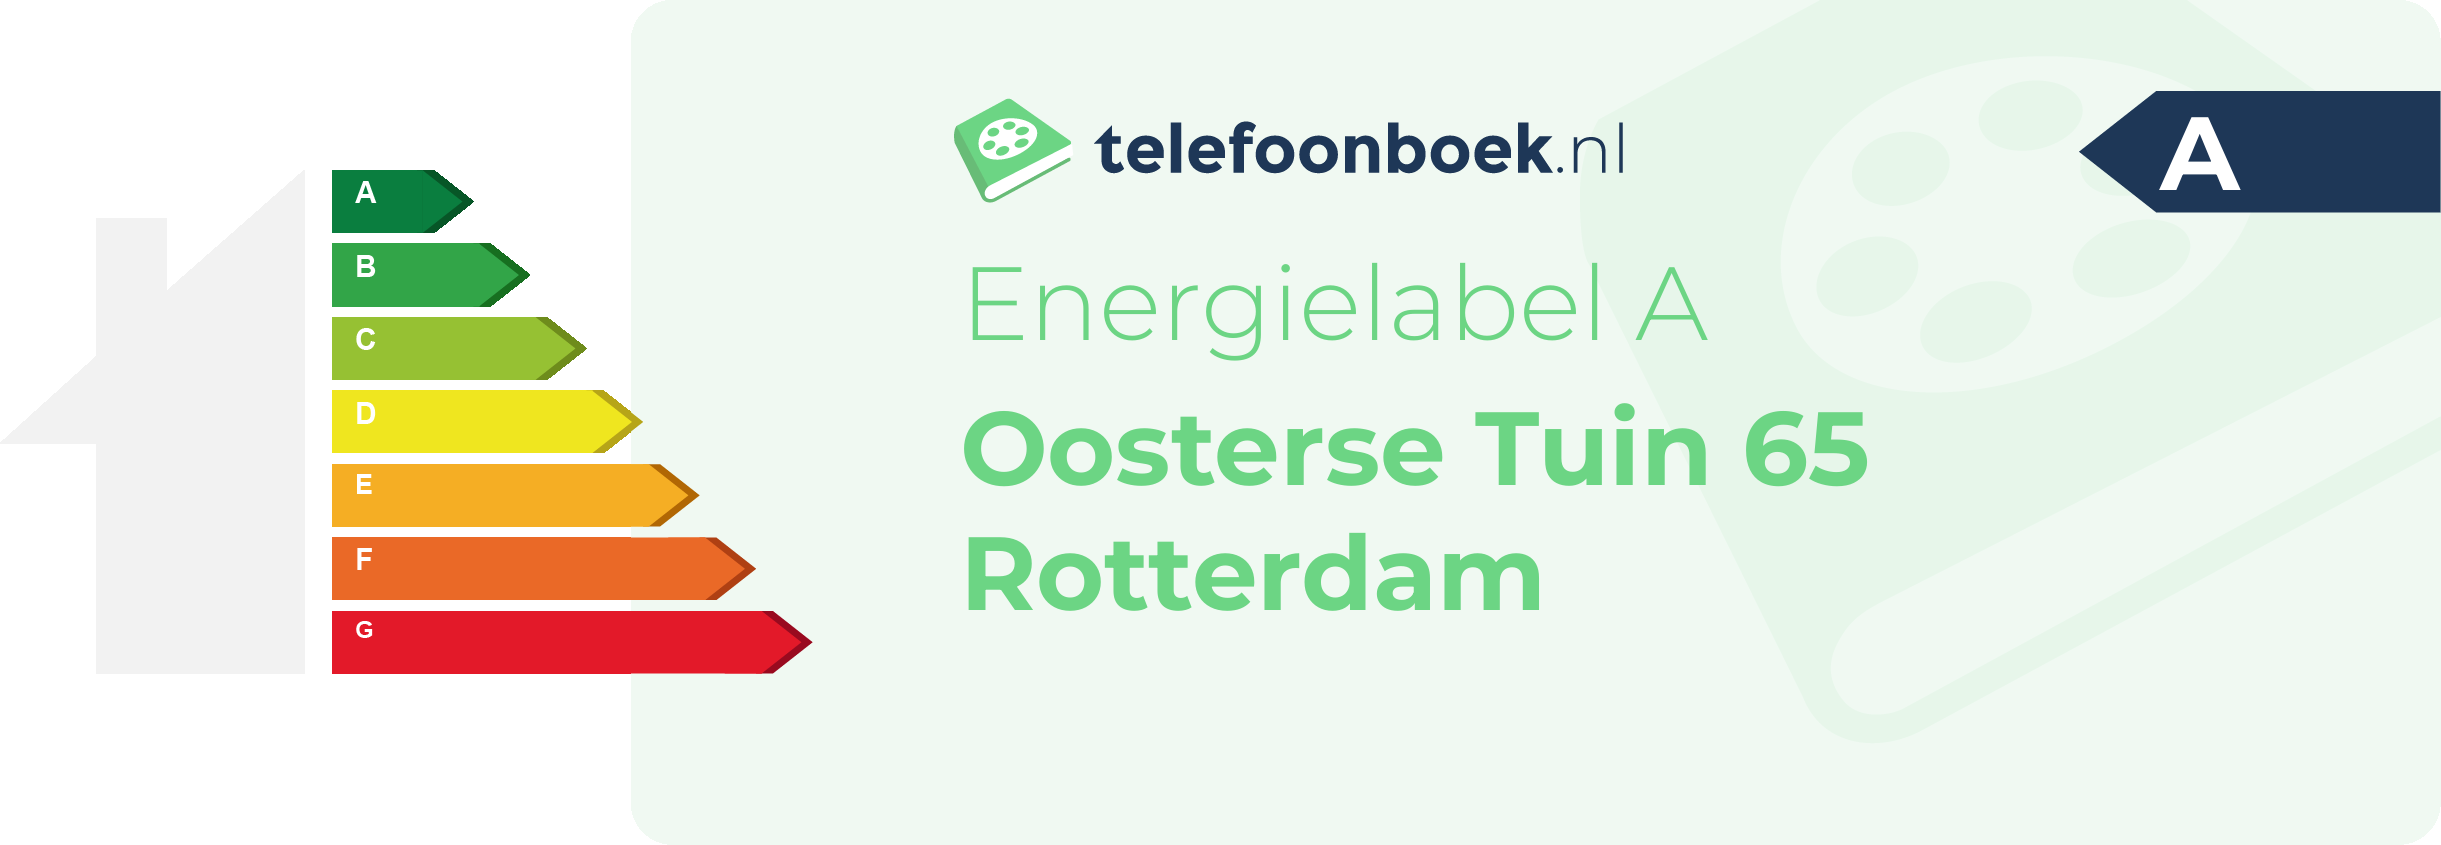 Energielabel Oosterse Tuin 65 Rotterdam